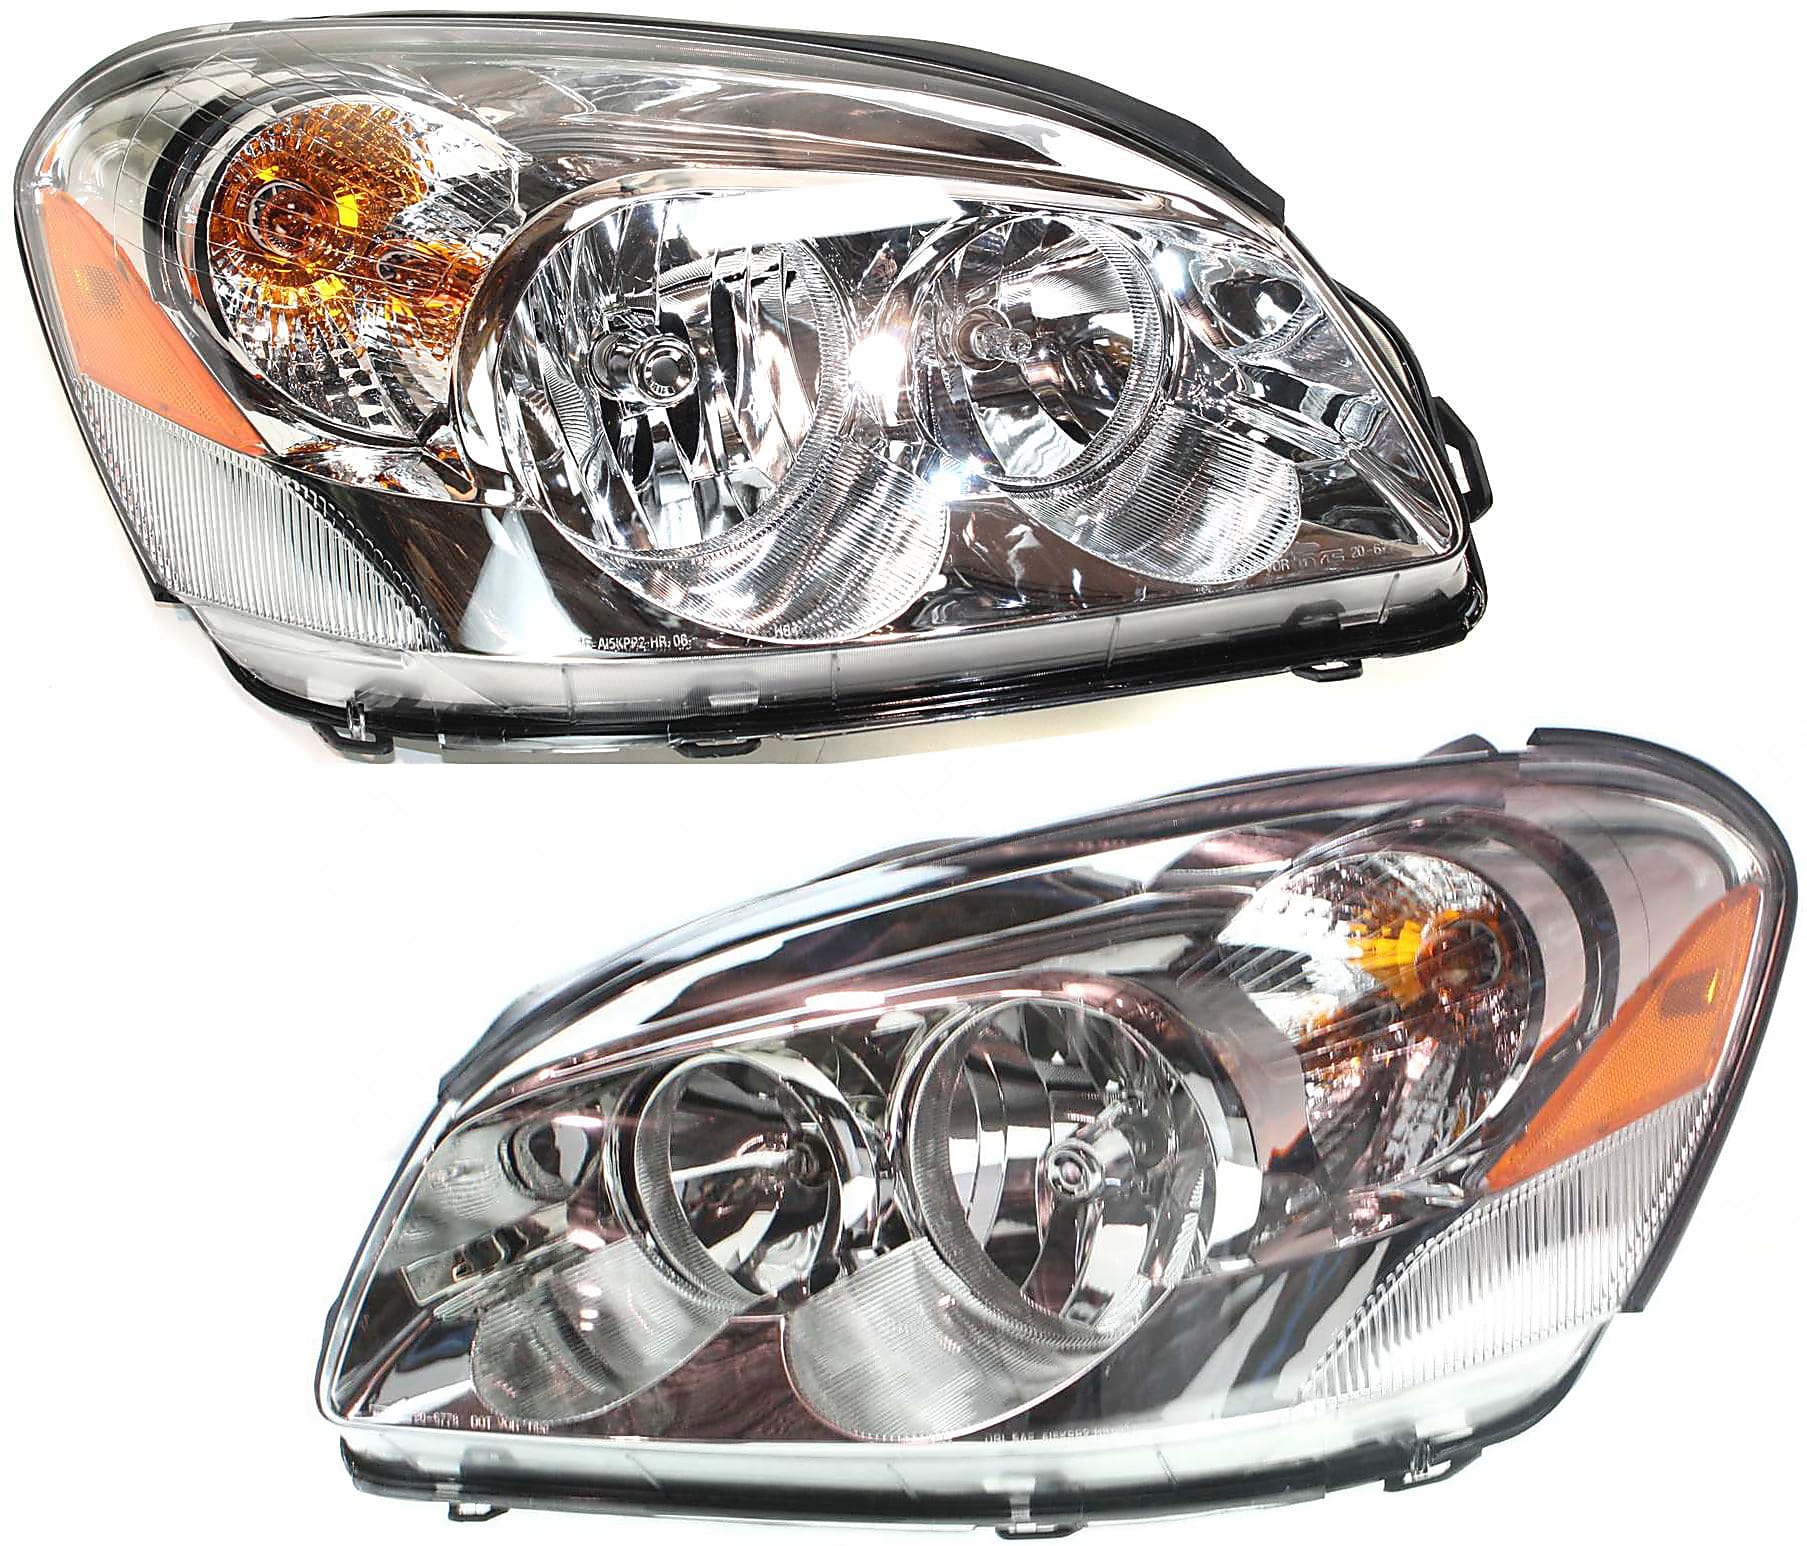 Multiple Manufacturers GM2502277C Partslink GM2502277 OE Replacement Headlight Assembly BUICK LUCERNE 2006-2011 